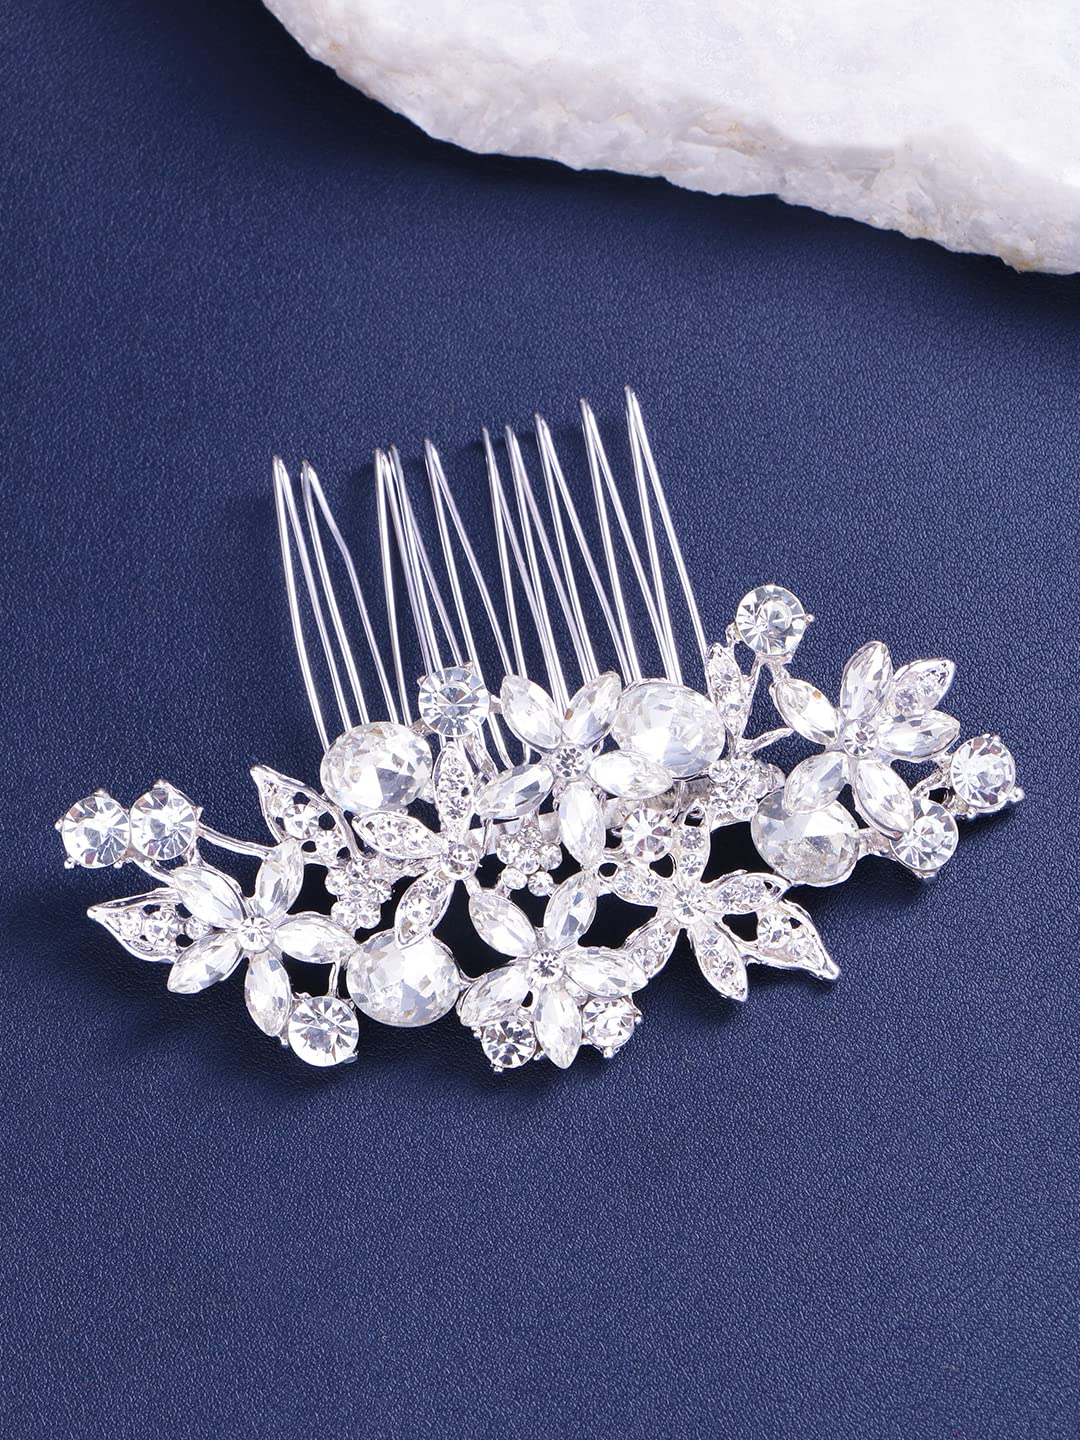 Yellow Chimes Comb Pin for Women Hair Accessories for Women Floral Comb Clips for Hair for Women Western Crystal Hair Pin Bridal Hair Accessories for Wedding Side Pin / Comb Pin / Juda Pin Accessories for Women